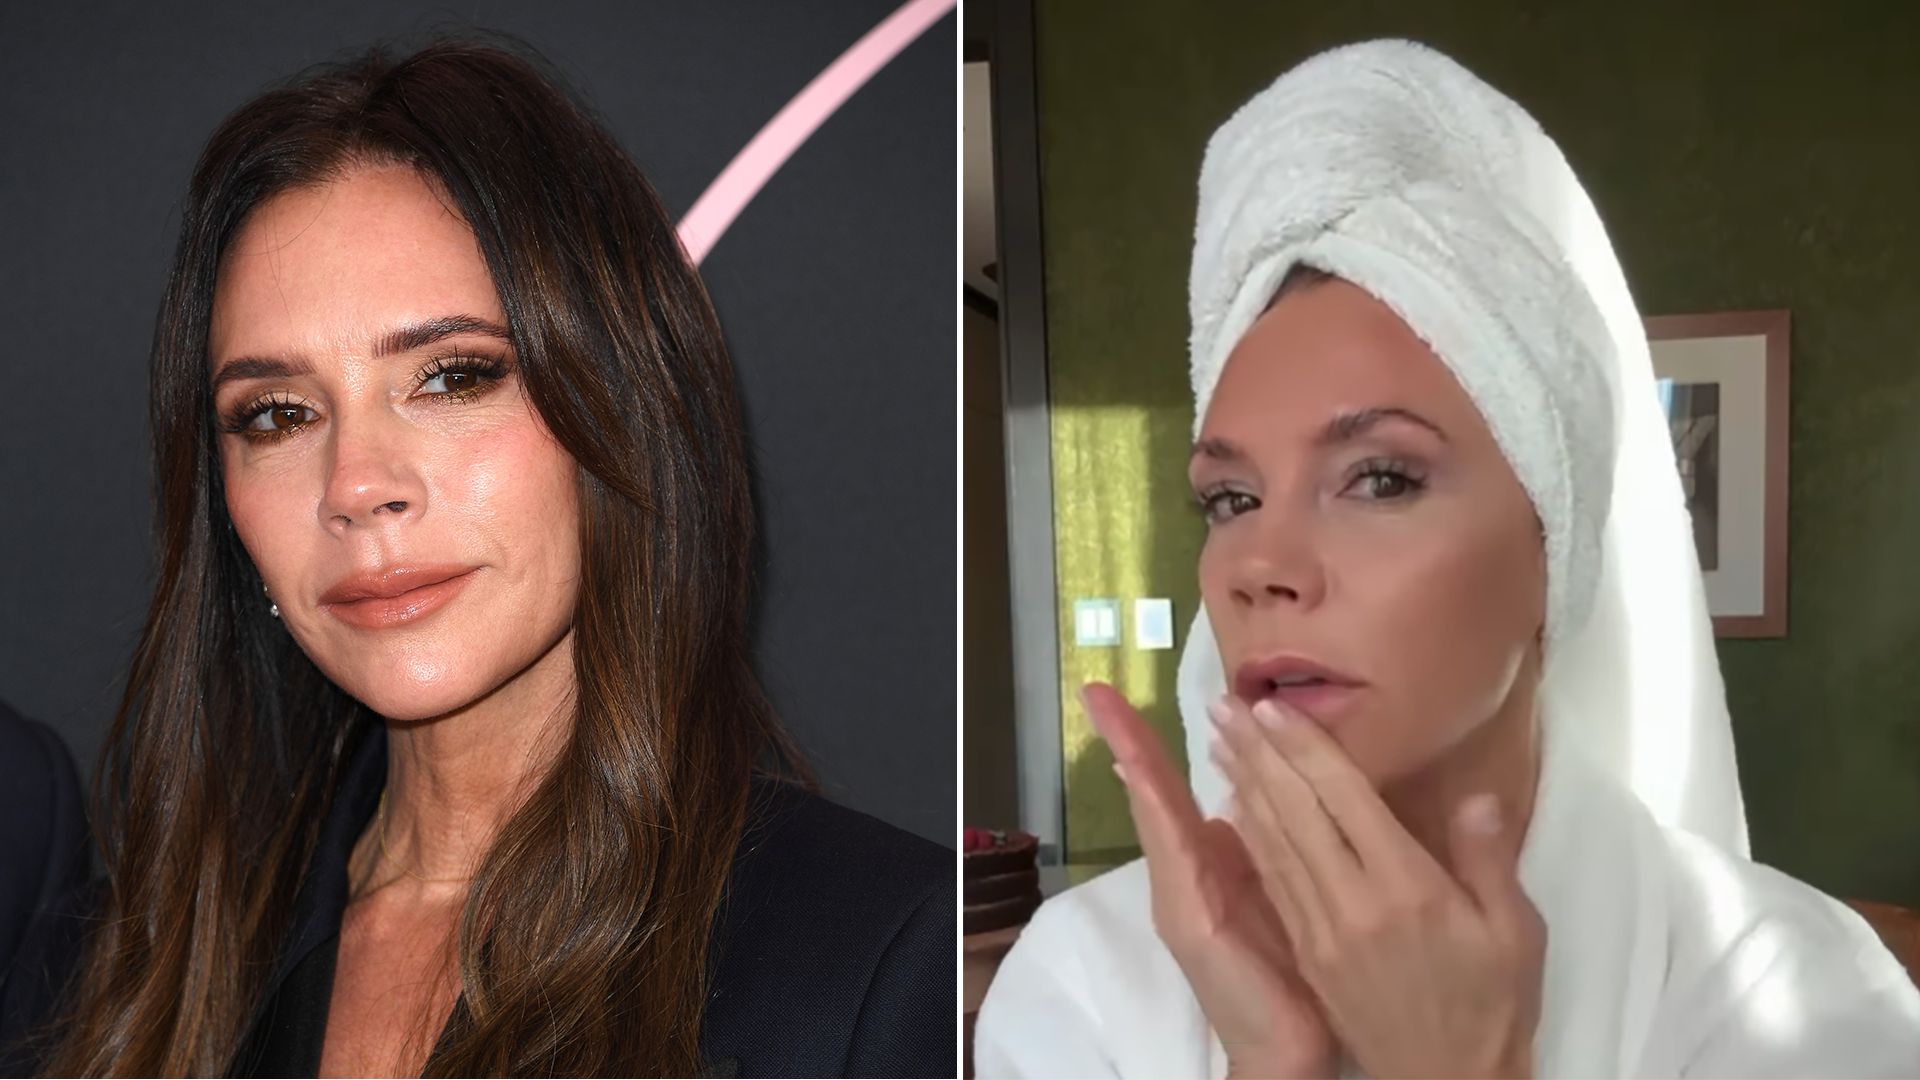 Split image showing Victoria Beckham at event and at home